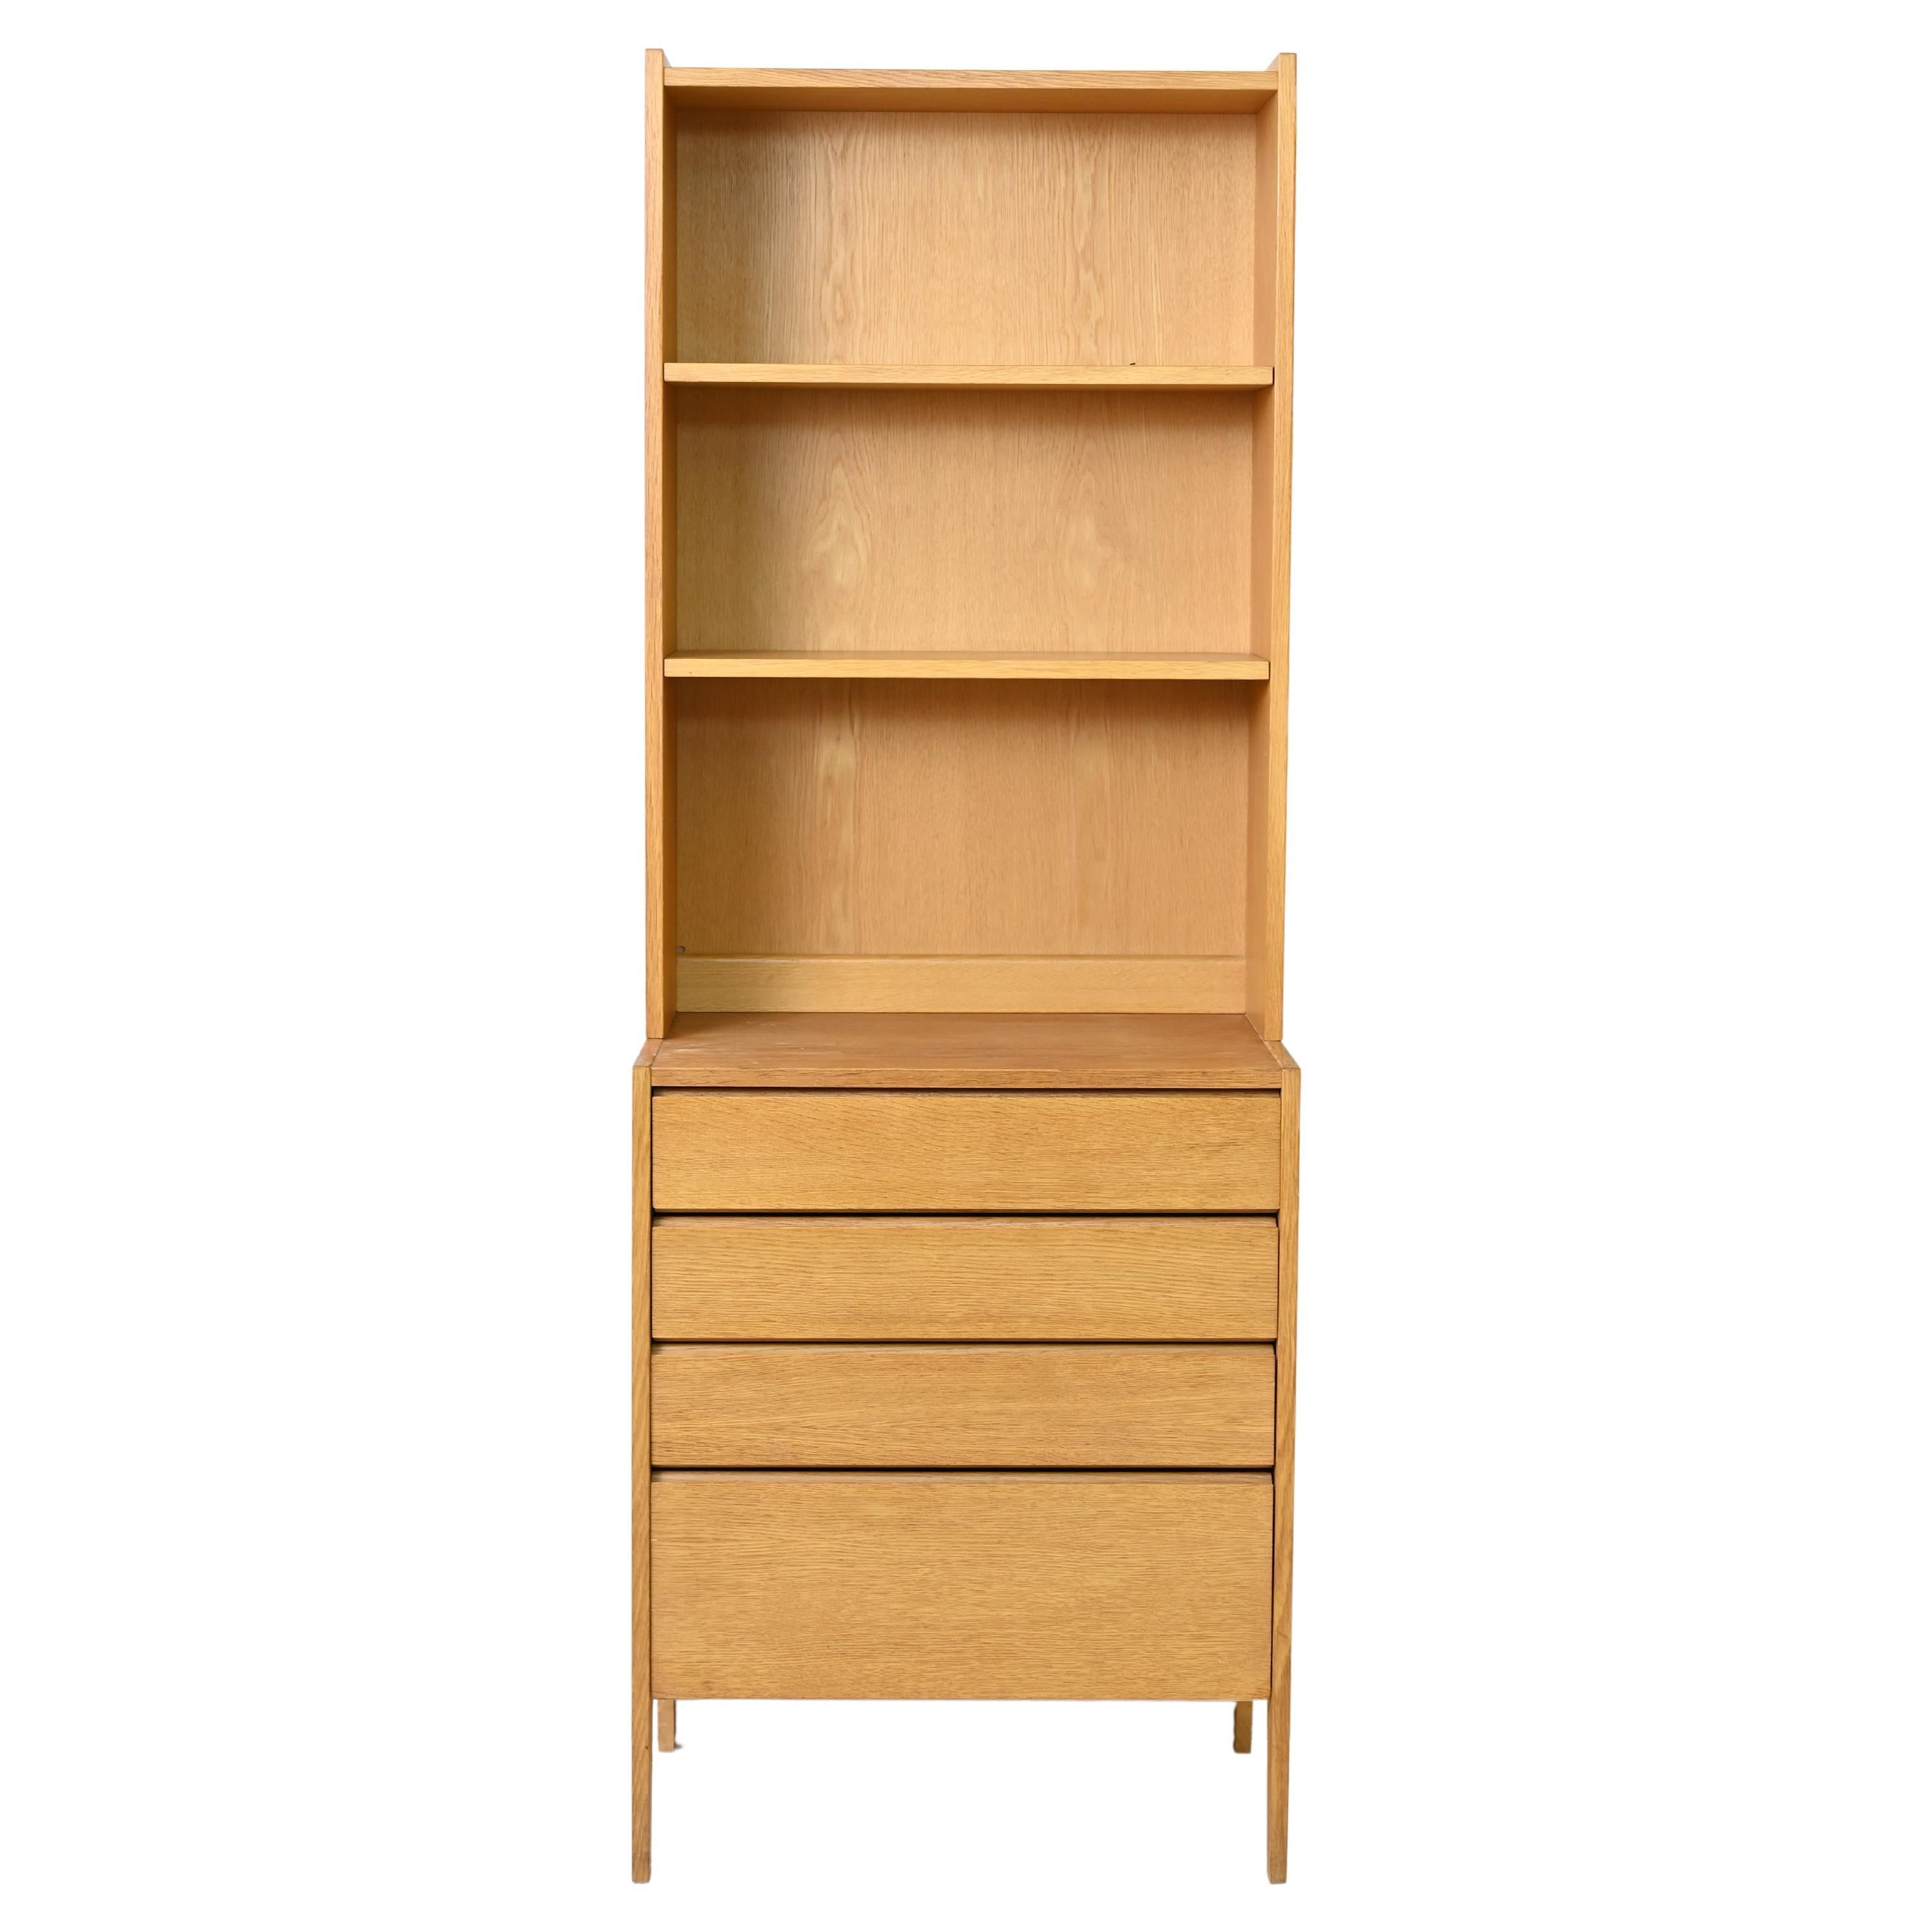 Original 1960s Oak Bookcase with Drawers